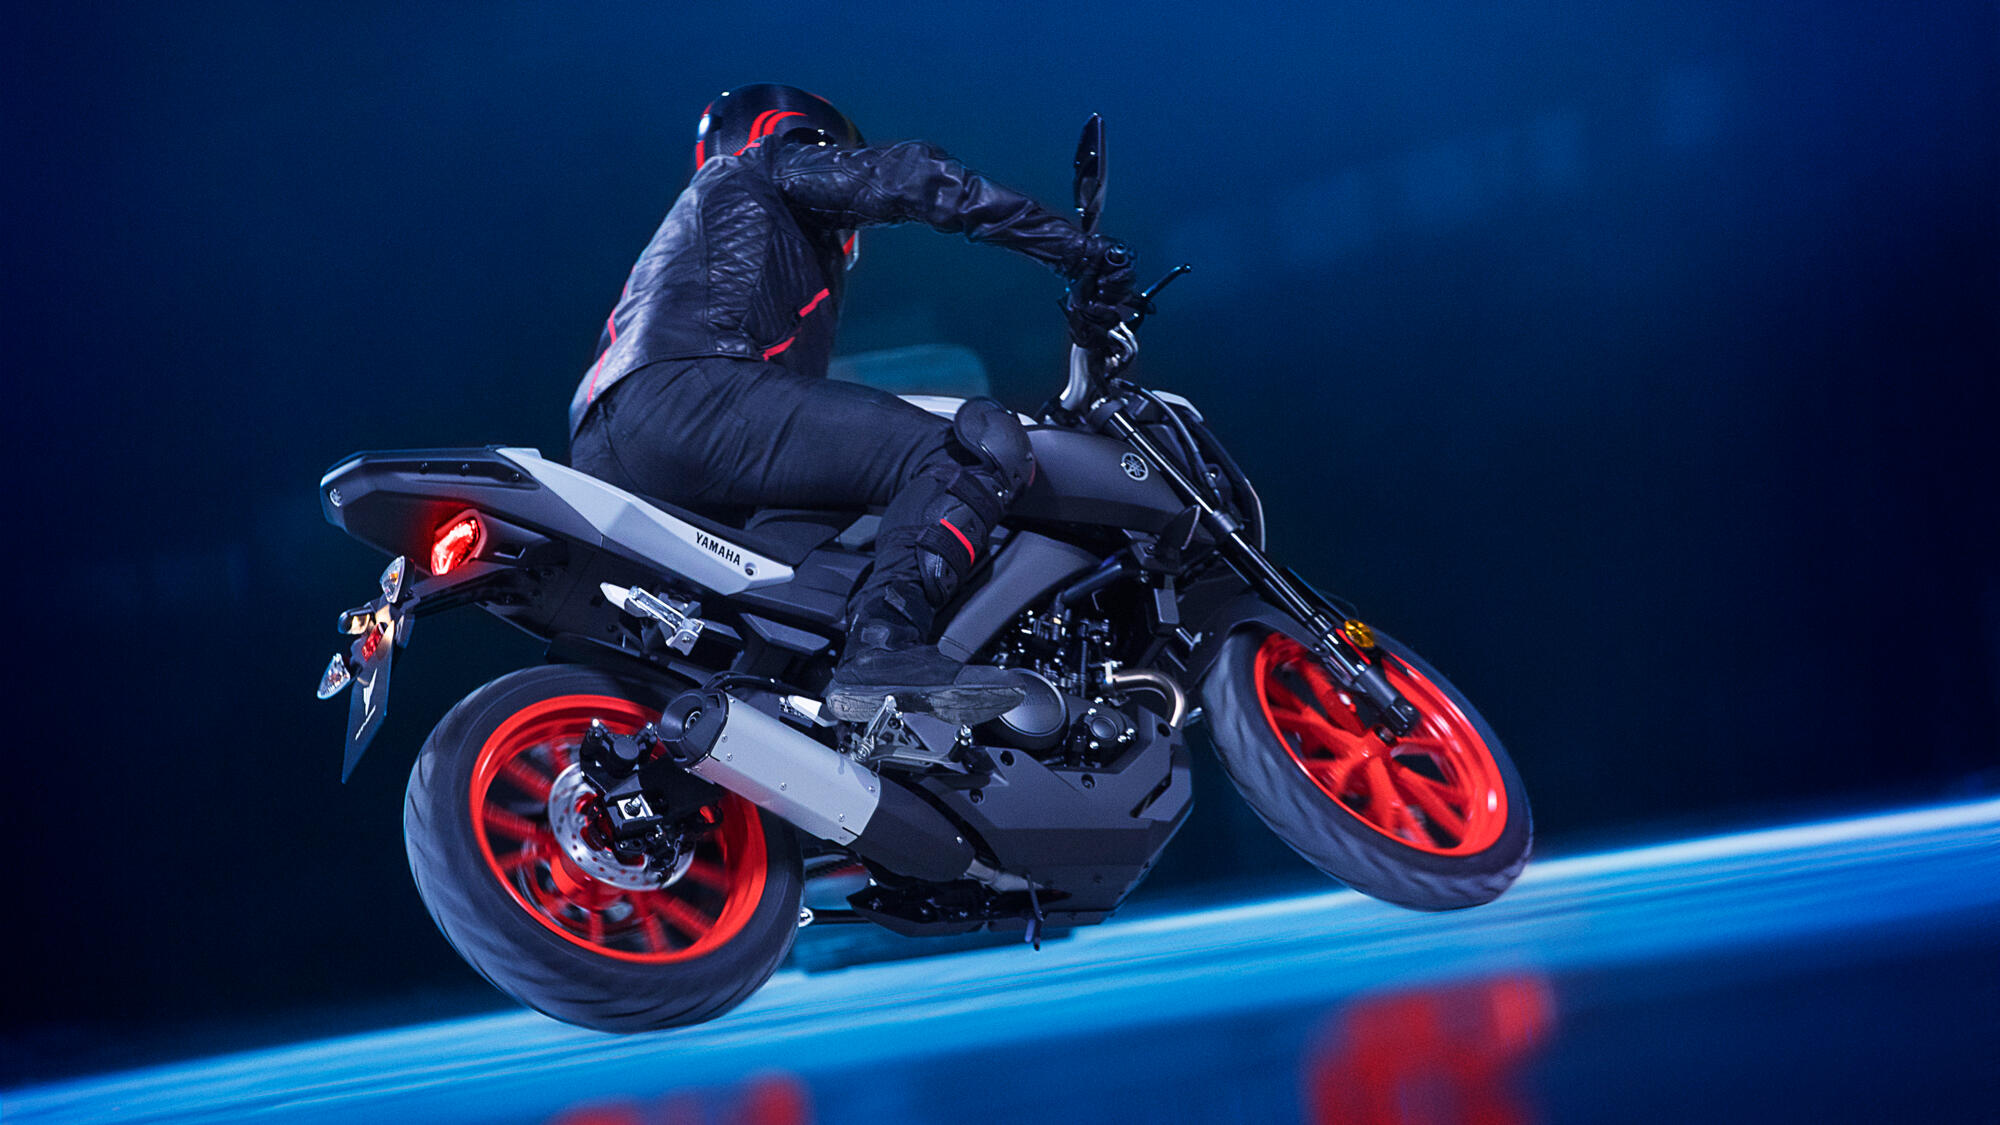 Yamaha MT - 125 - 125cc - Posted on 12th of September 2019 